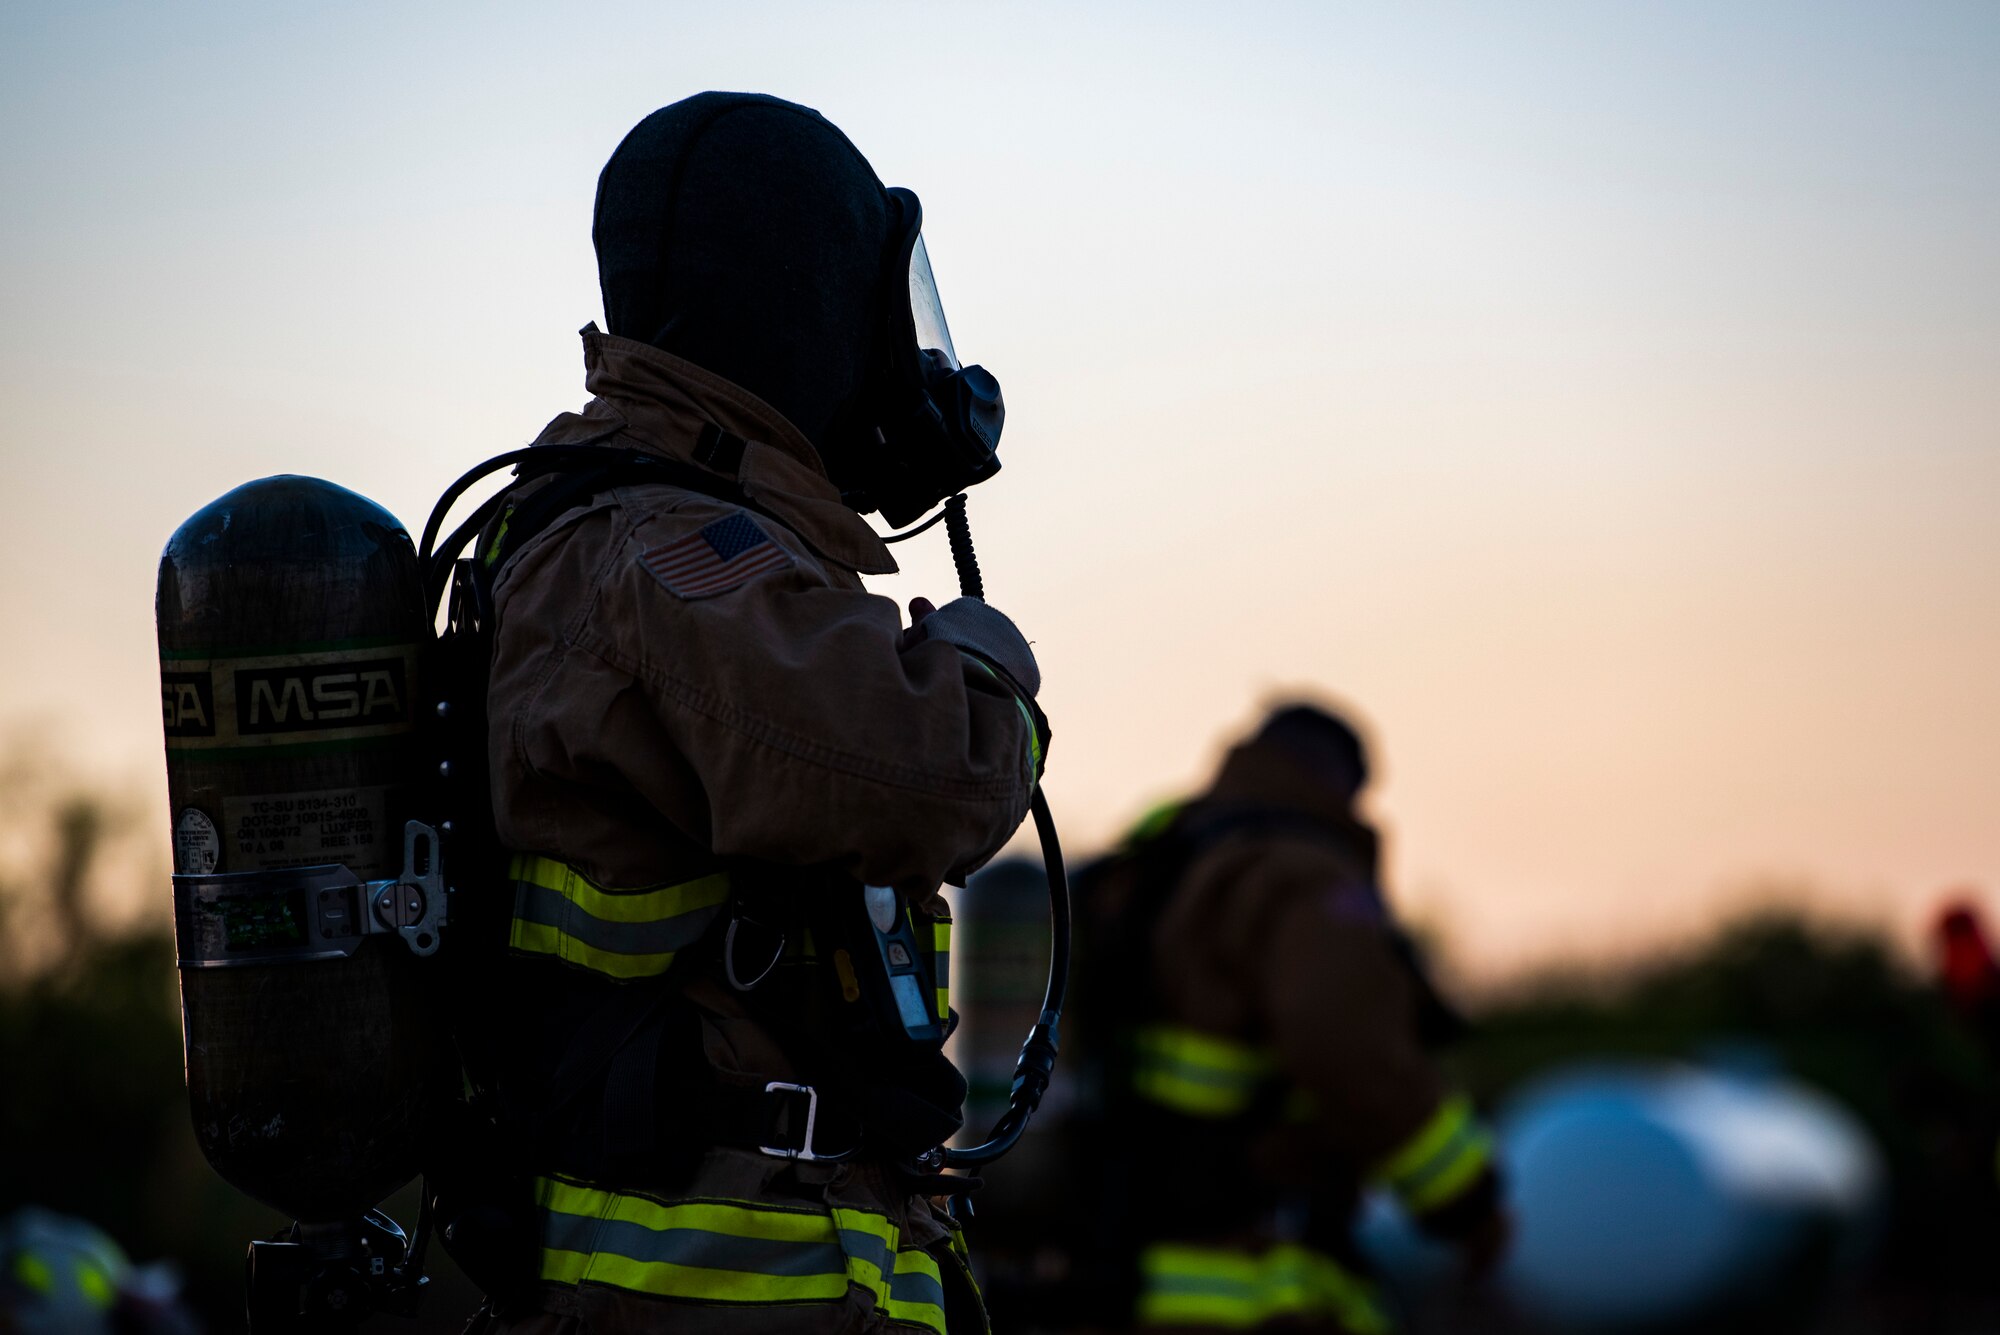 Firefighters assigned to the 7th Civil Engineer Squadron and 512th CES, dawn fire protective gear before conducting nighttime aircraft fire training at Dyess Air Force Base, Texas, May 4, 2021. The 7th CES firefighters routinely conduct training to enhance safety and proficiency while fighting fires. (U.S. Air Force photo by Airman 1st Class Colin Hollowell)